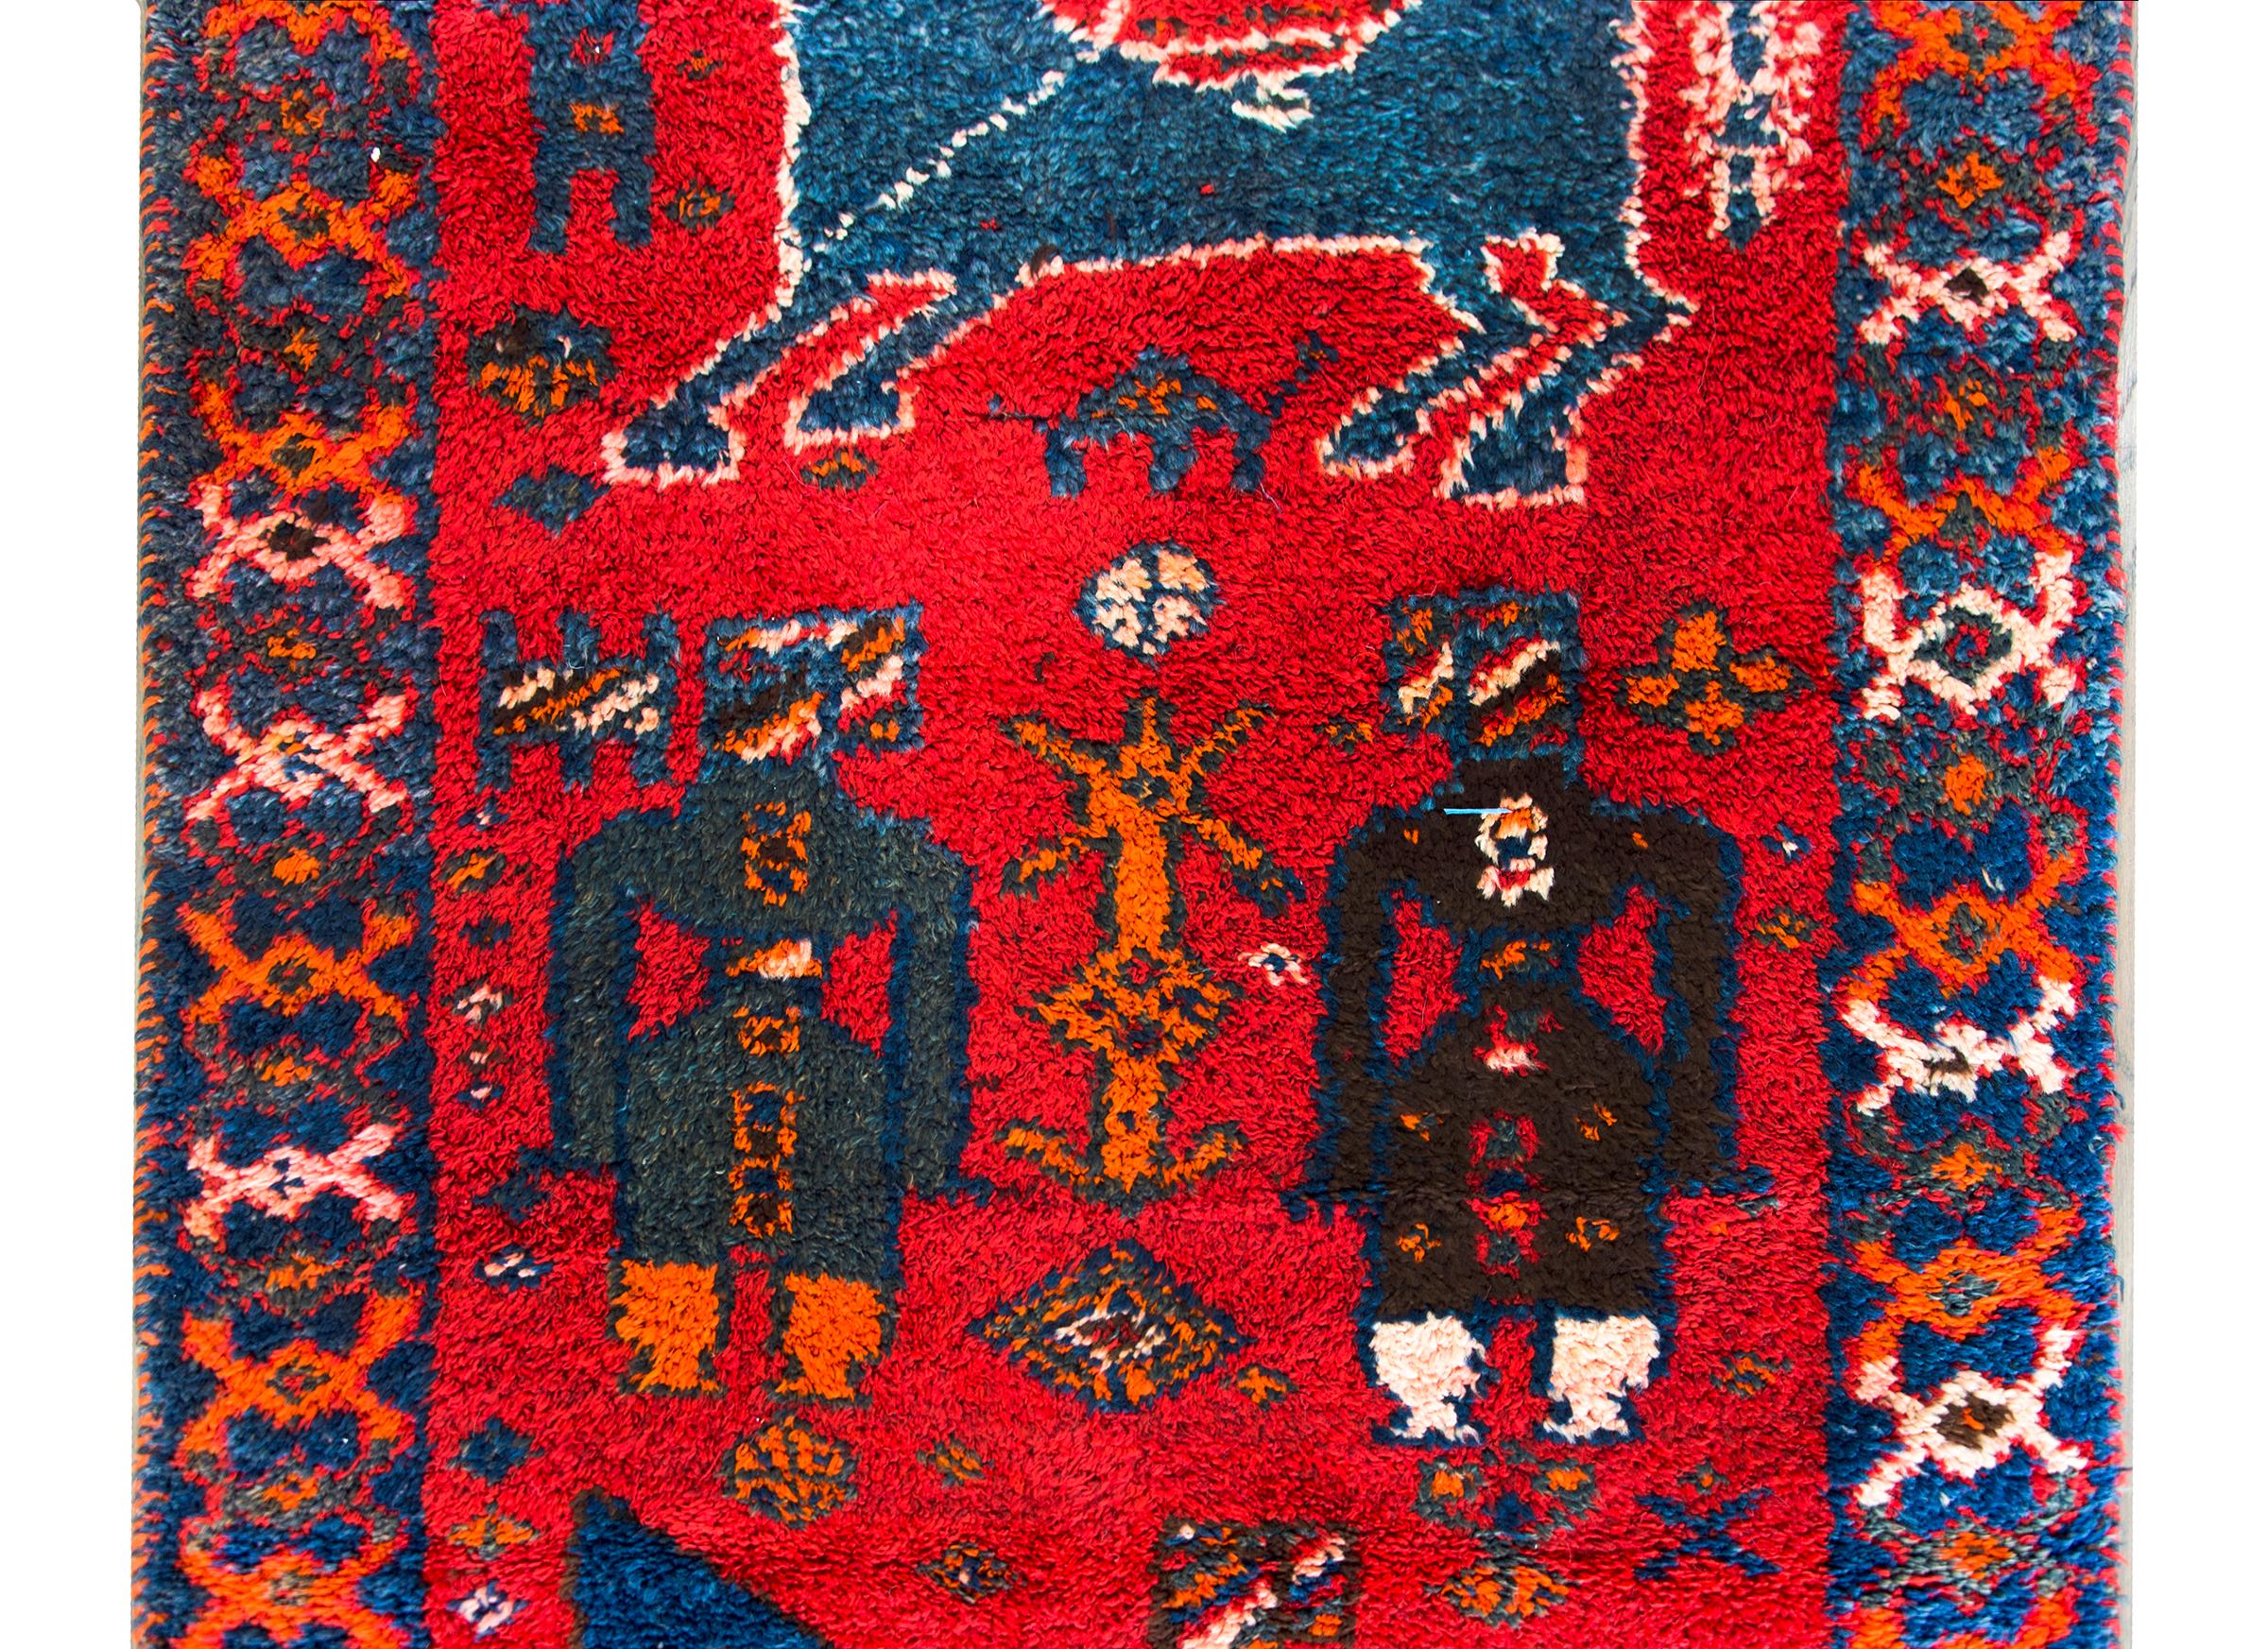 A bold mid-20th century Turkish Oushak rug with an unusual pattern containing standing figures and two figures on horseback all woven in brilliant indigos, turquoise, orange, and white set against a crimson background, and surrounded by a geometric